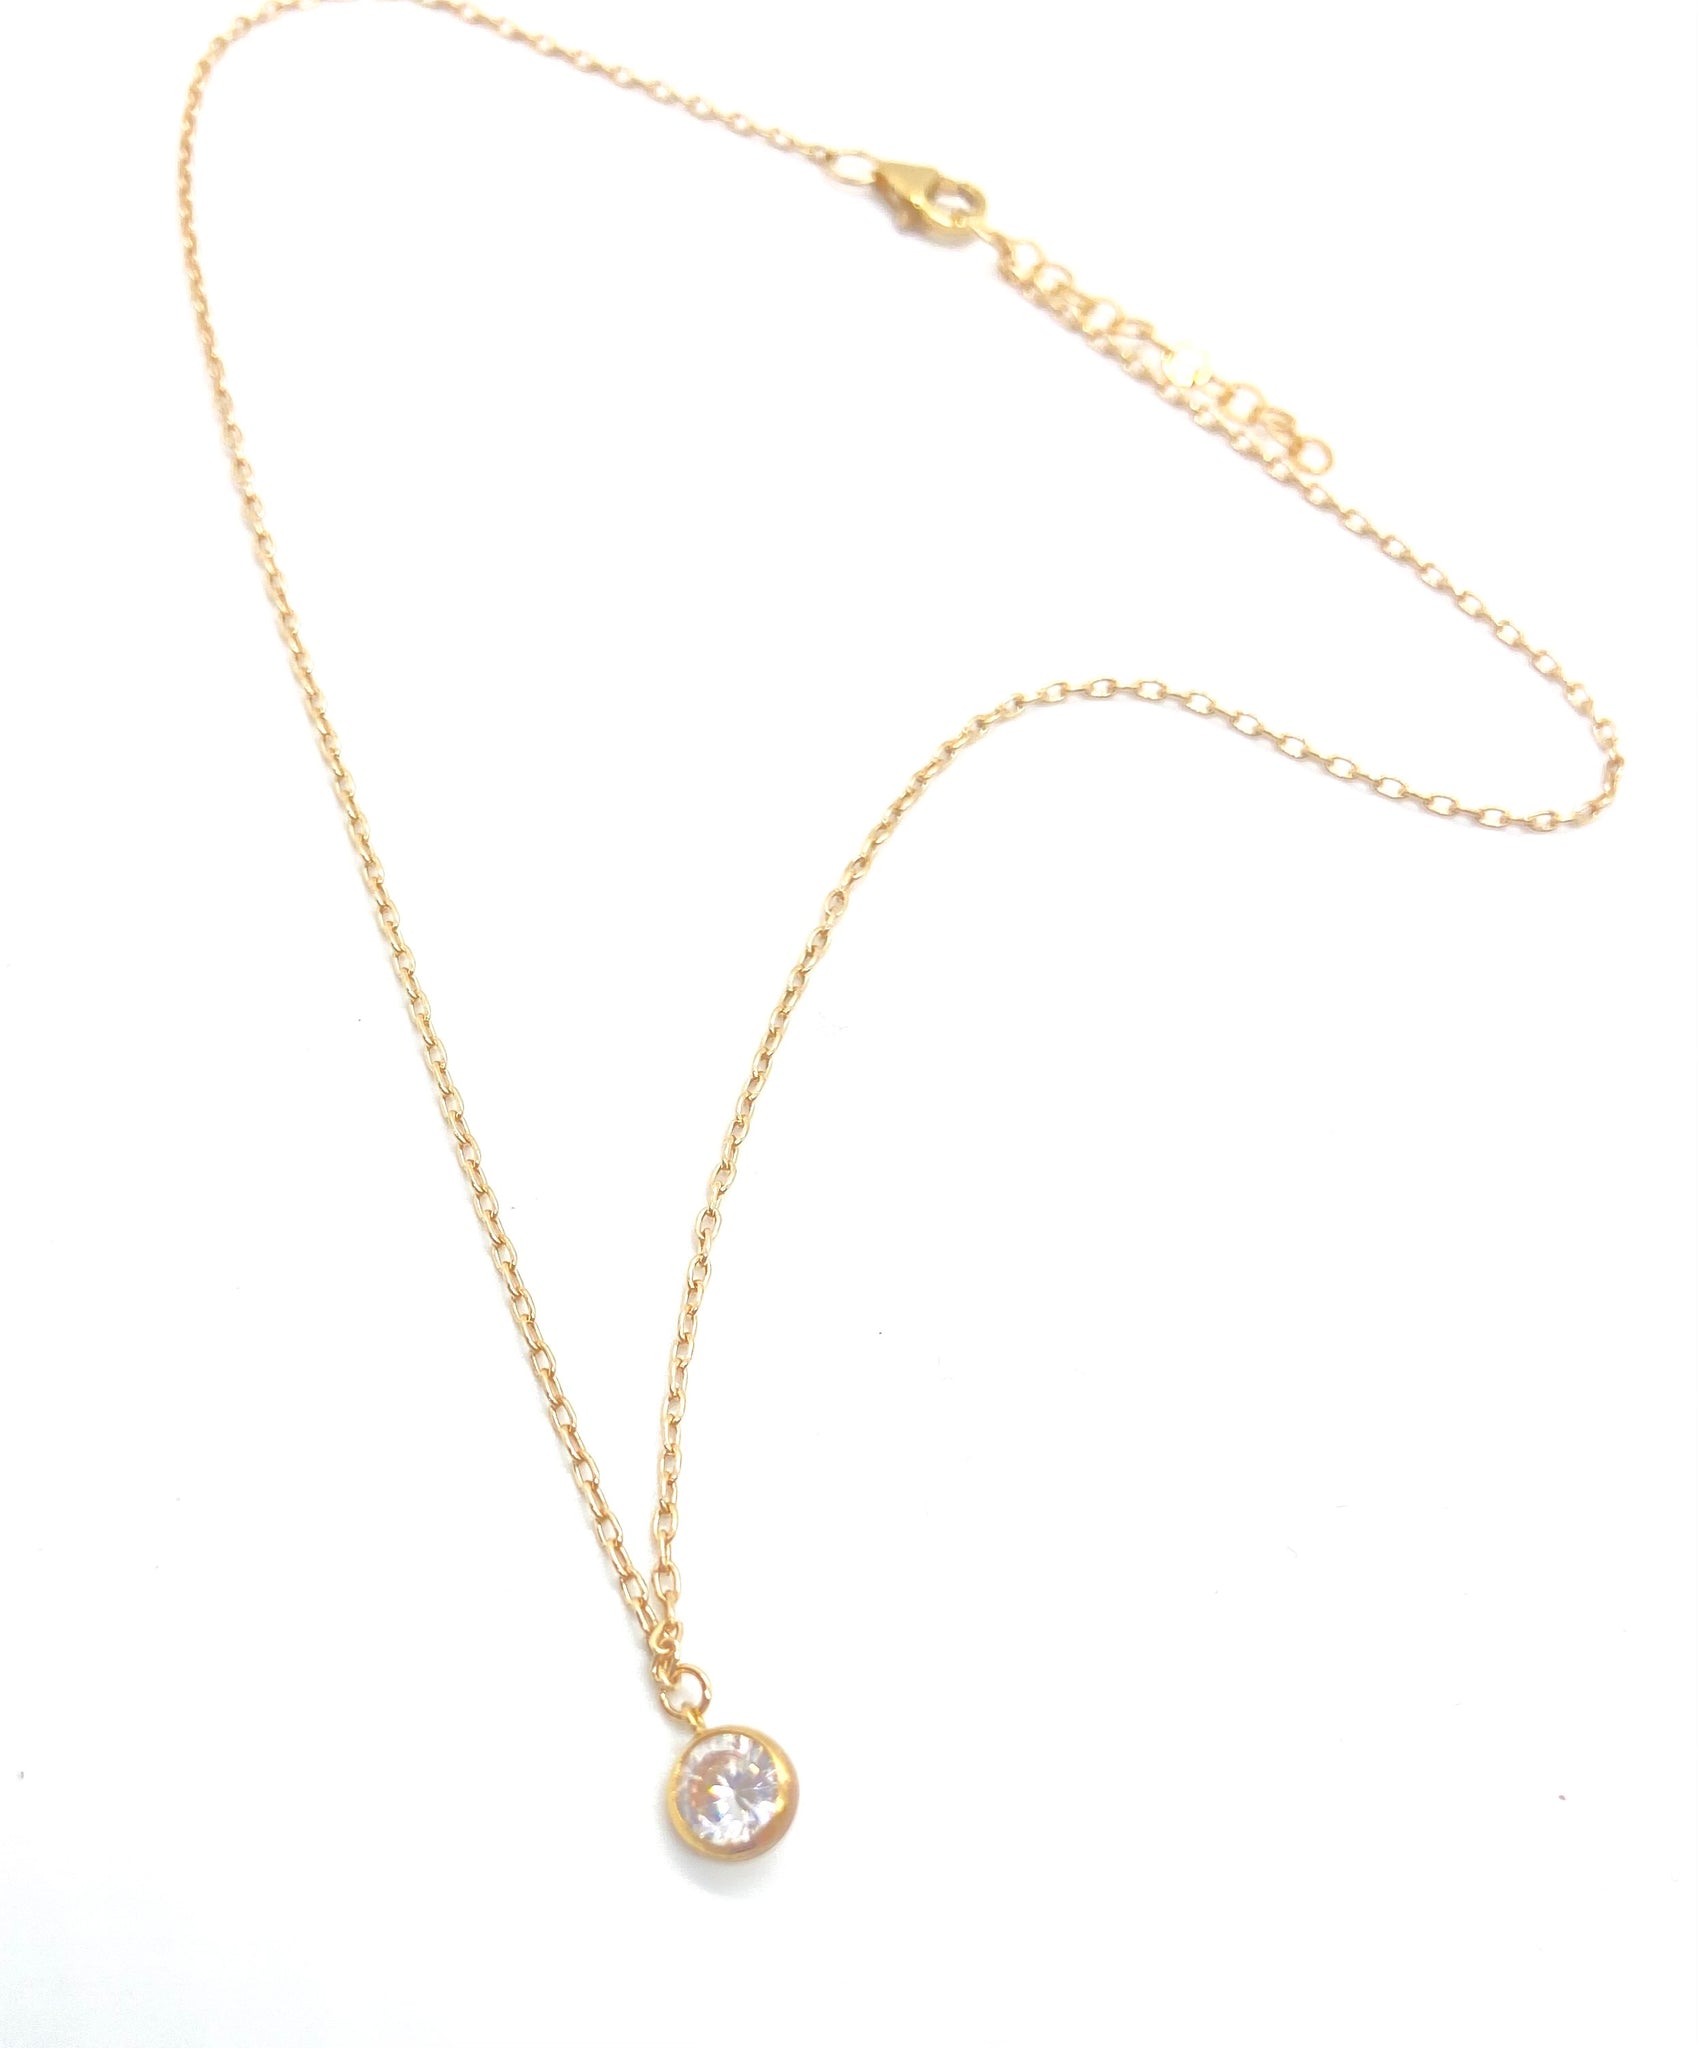 Gold Filled chain with 14k Gold Filled CZ 4mm Pendant